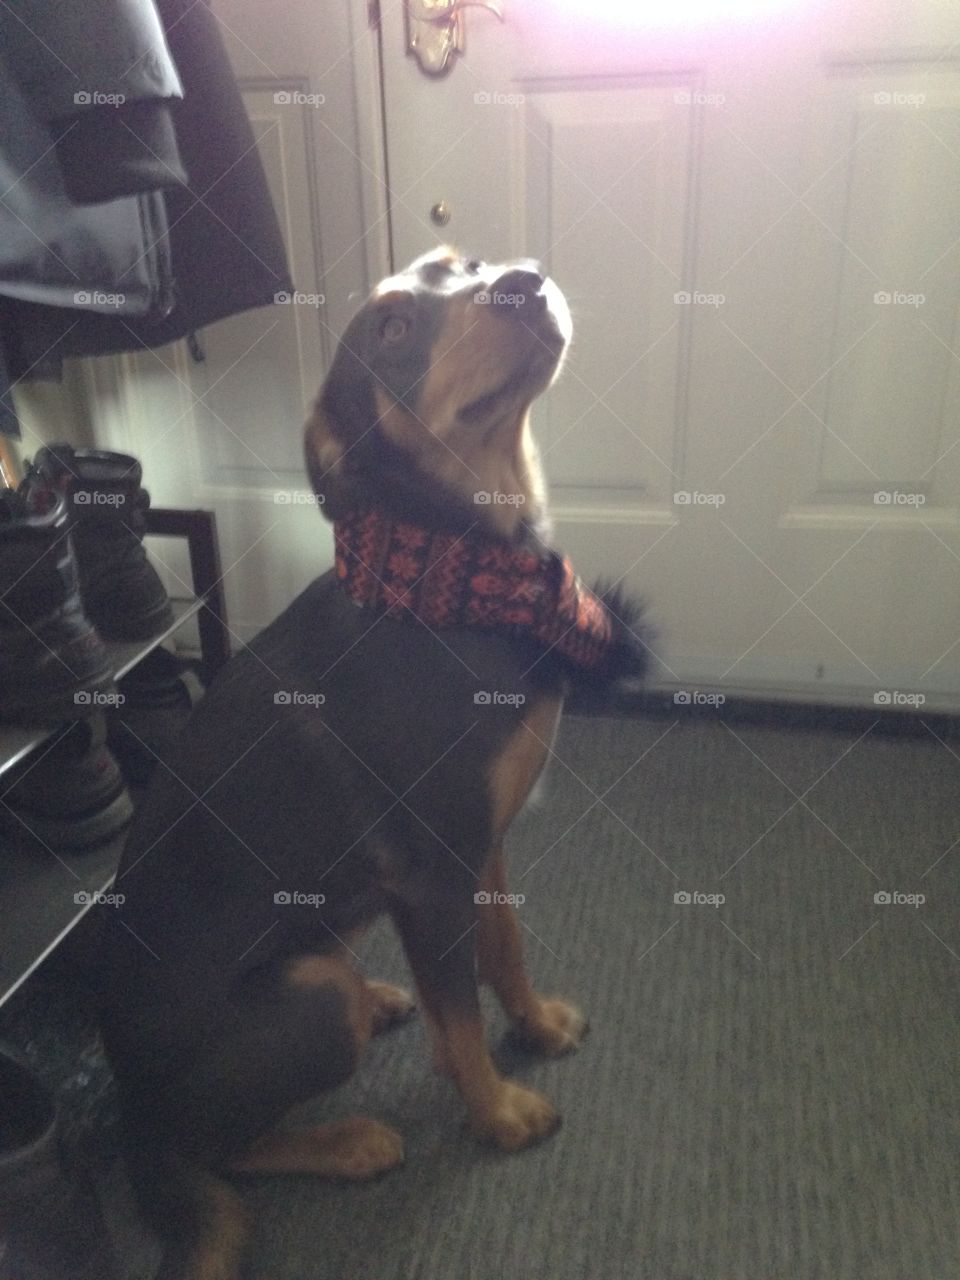 Adorable autumn dog in a dashing scarf us dressed for the chilly weather on the much anticipated walk to the park!